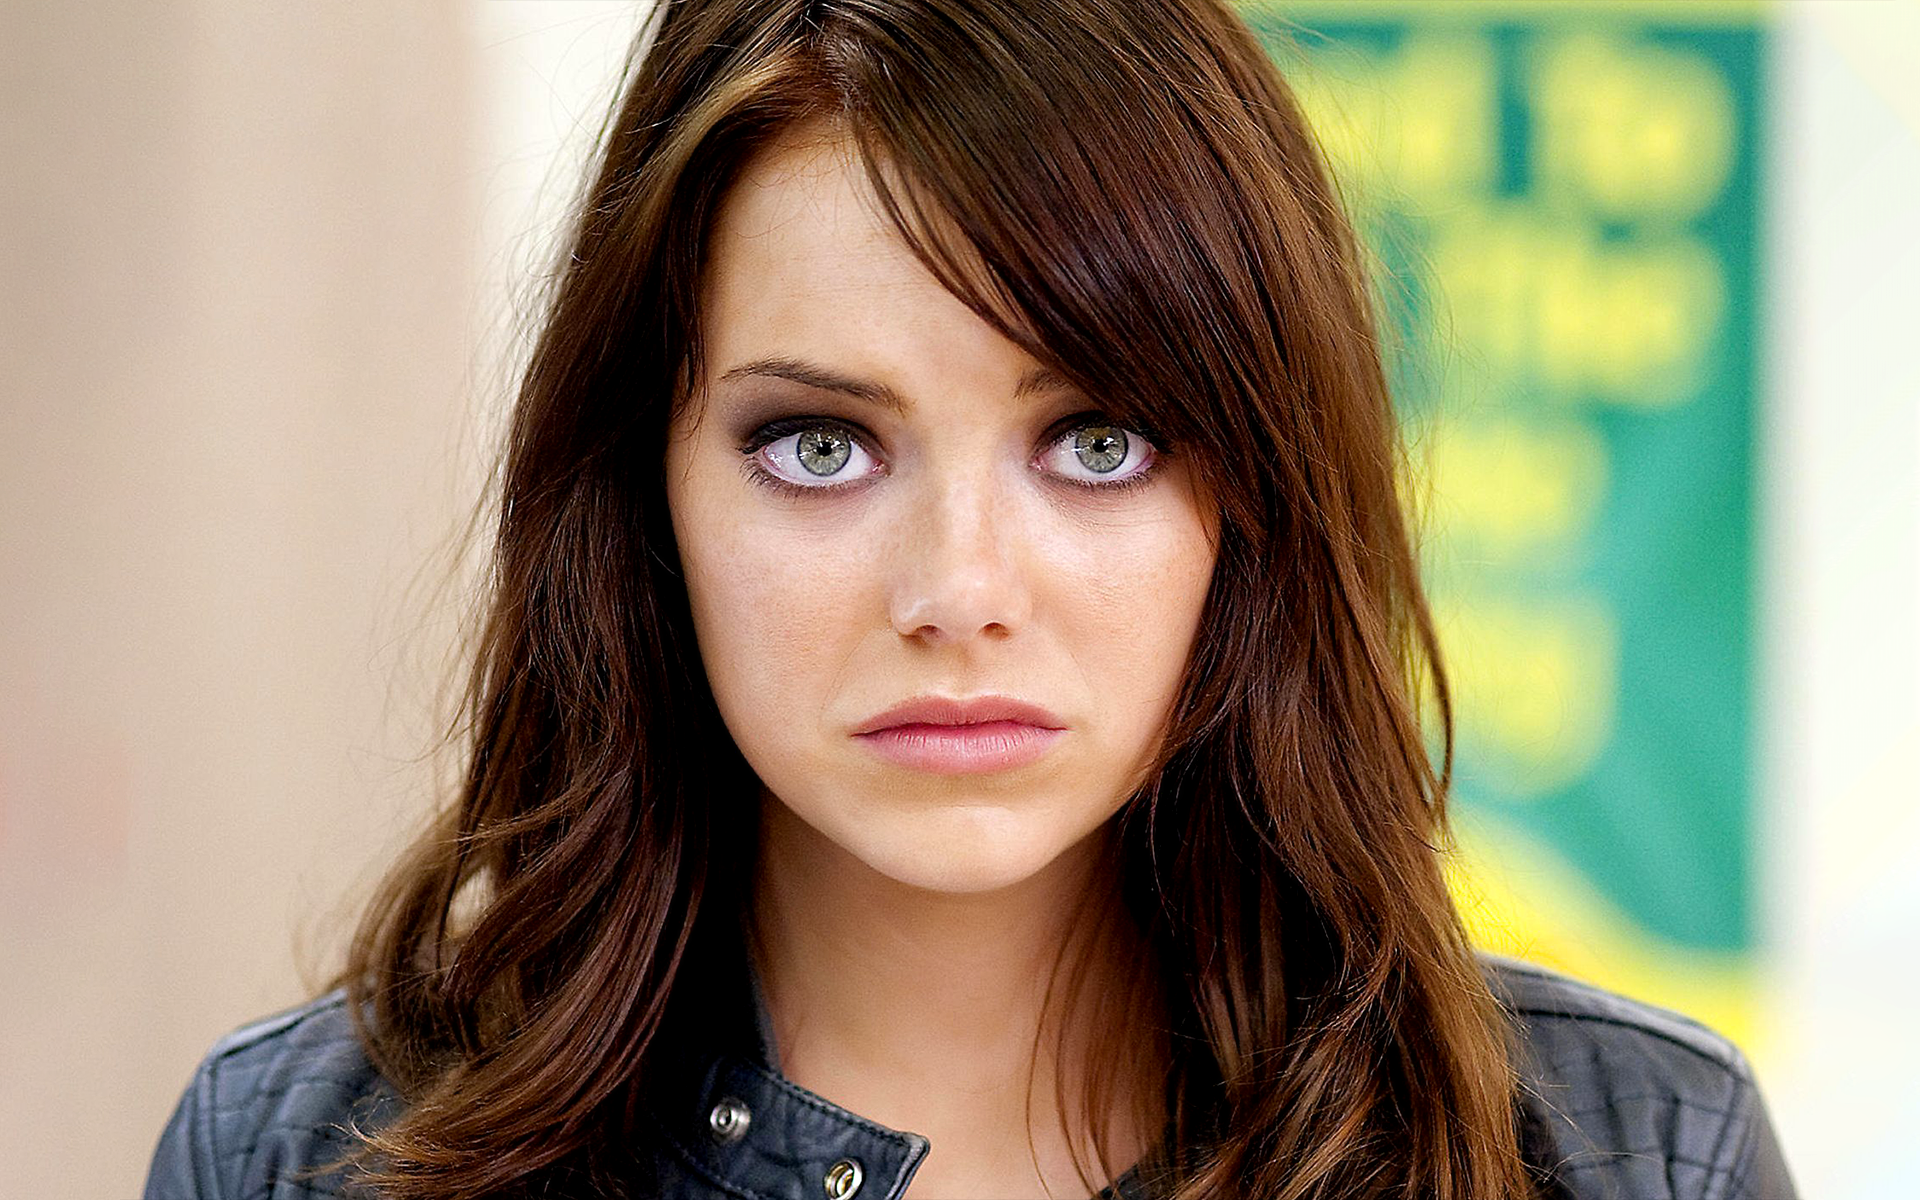 Emma Stone Actress Zombieland Eyes Angry Looking At Viewer Wallpaper -  Resolution:1920x1200 - ID:174409 